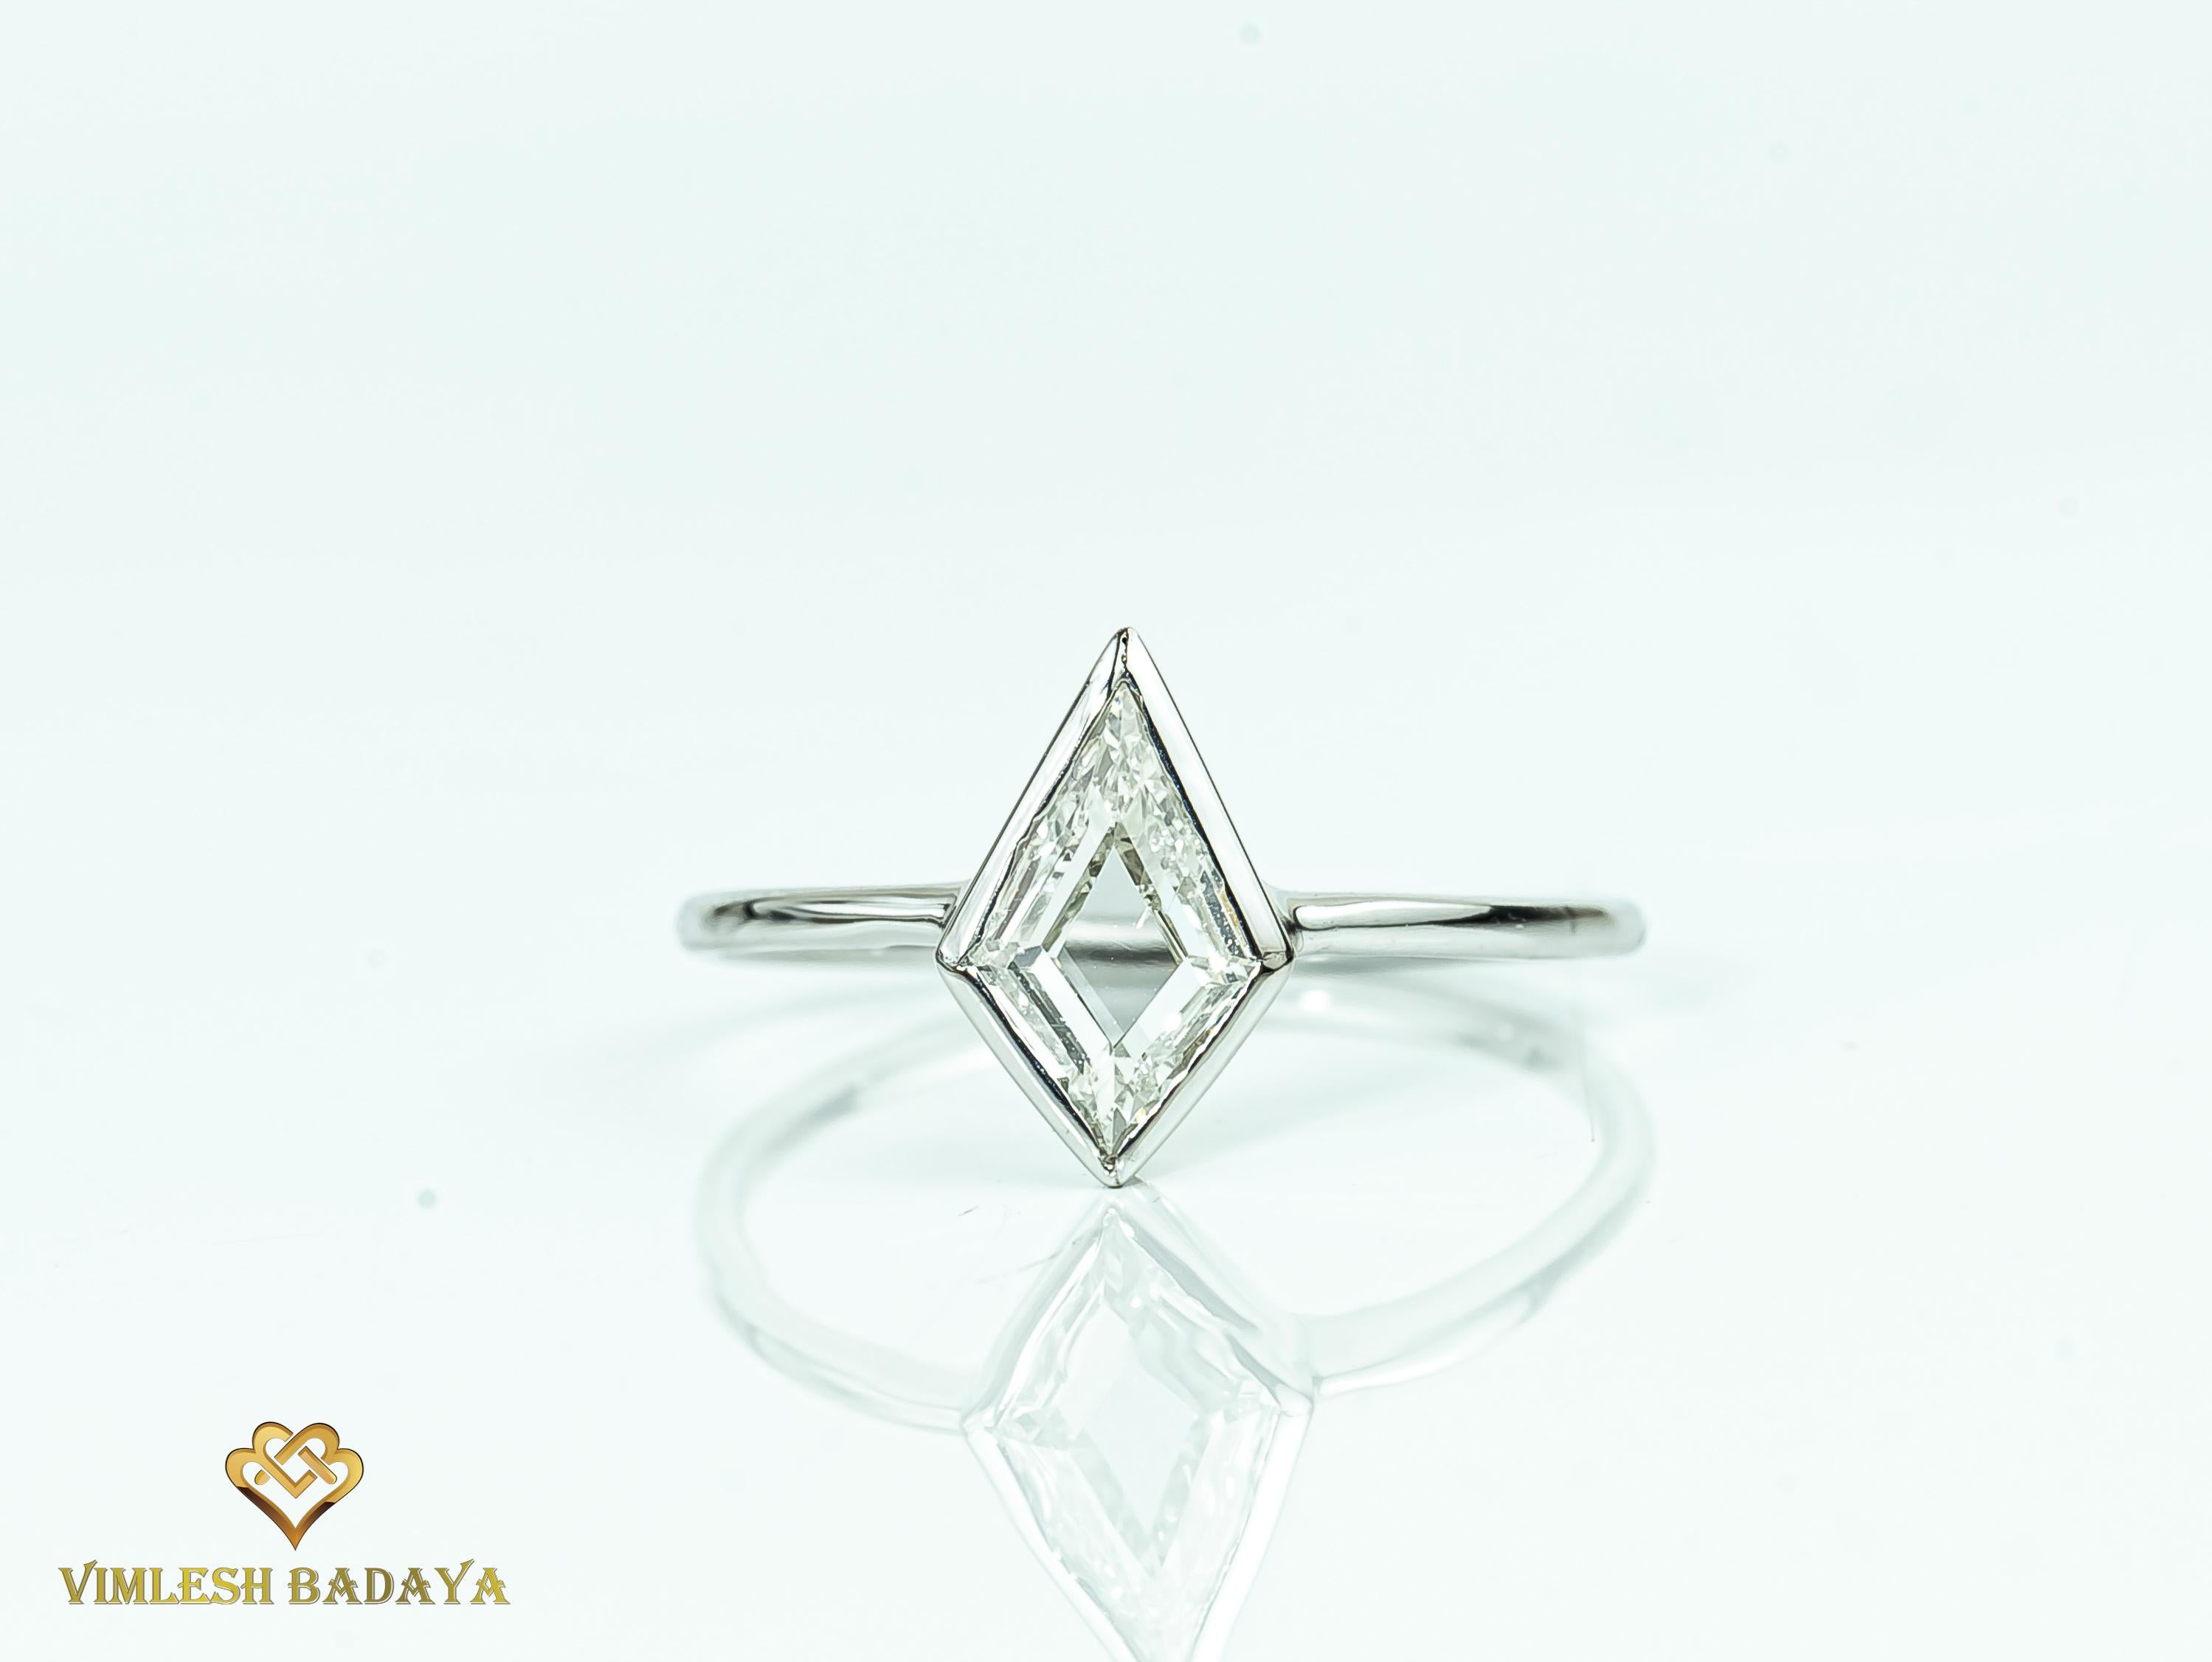 Kite diamond Engagement ring, Solitaire Diamond Ring, White Gold Diamond Ring, Kite ring, Promise/Anniversary ring, Geometric shapes

Available in 18k gold.

Same design can be made also with other custom gemstones per request.

Product details:

-